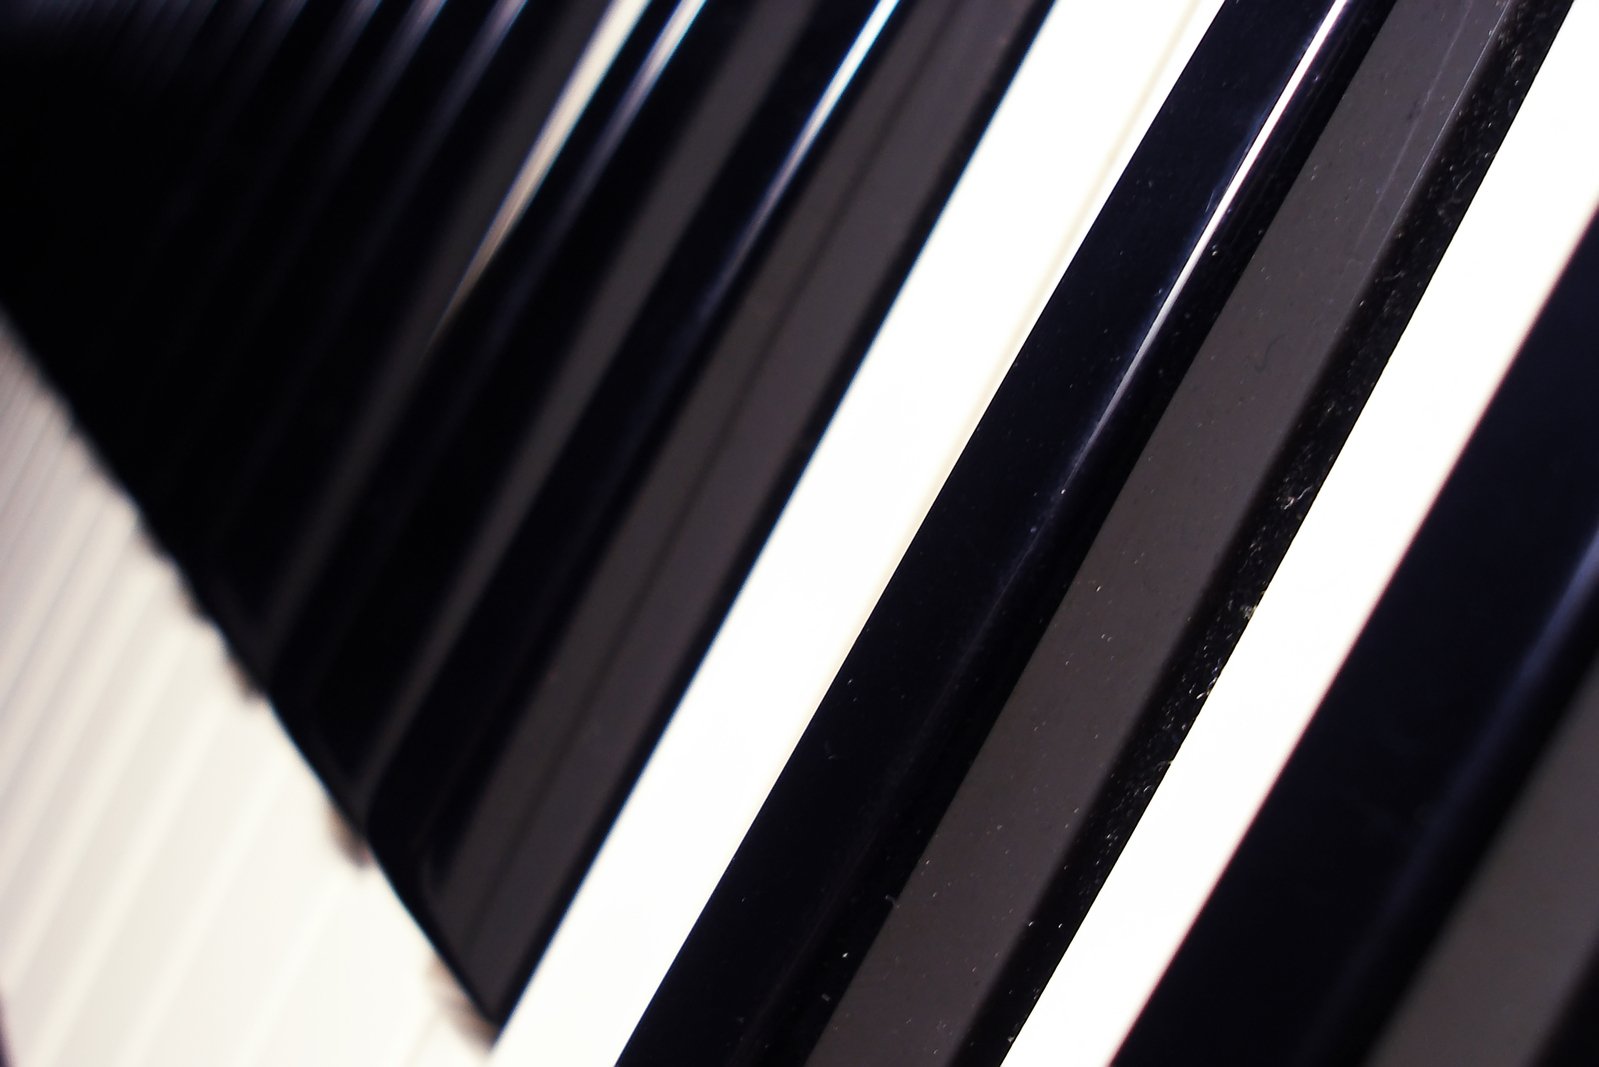 the image shows a long and close band piano